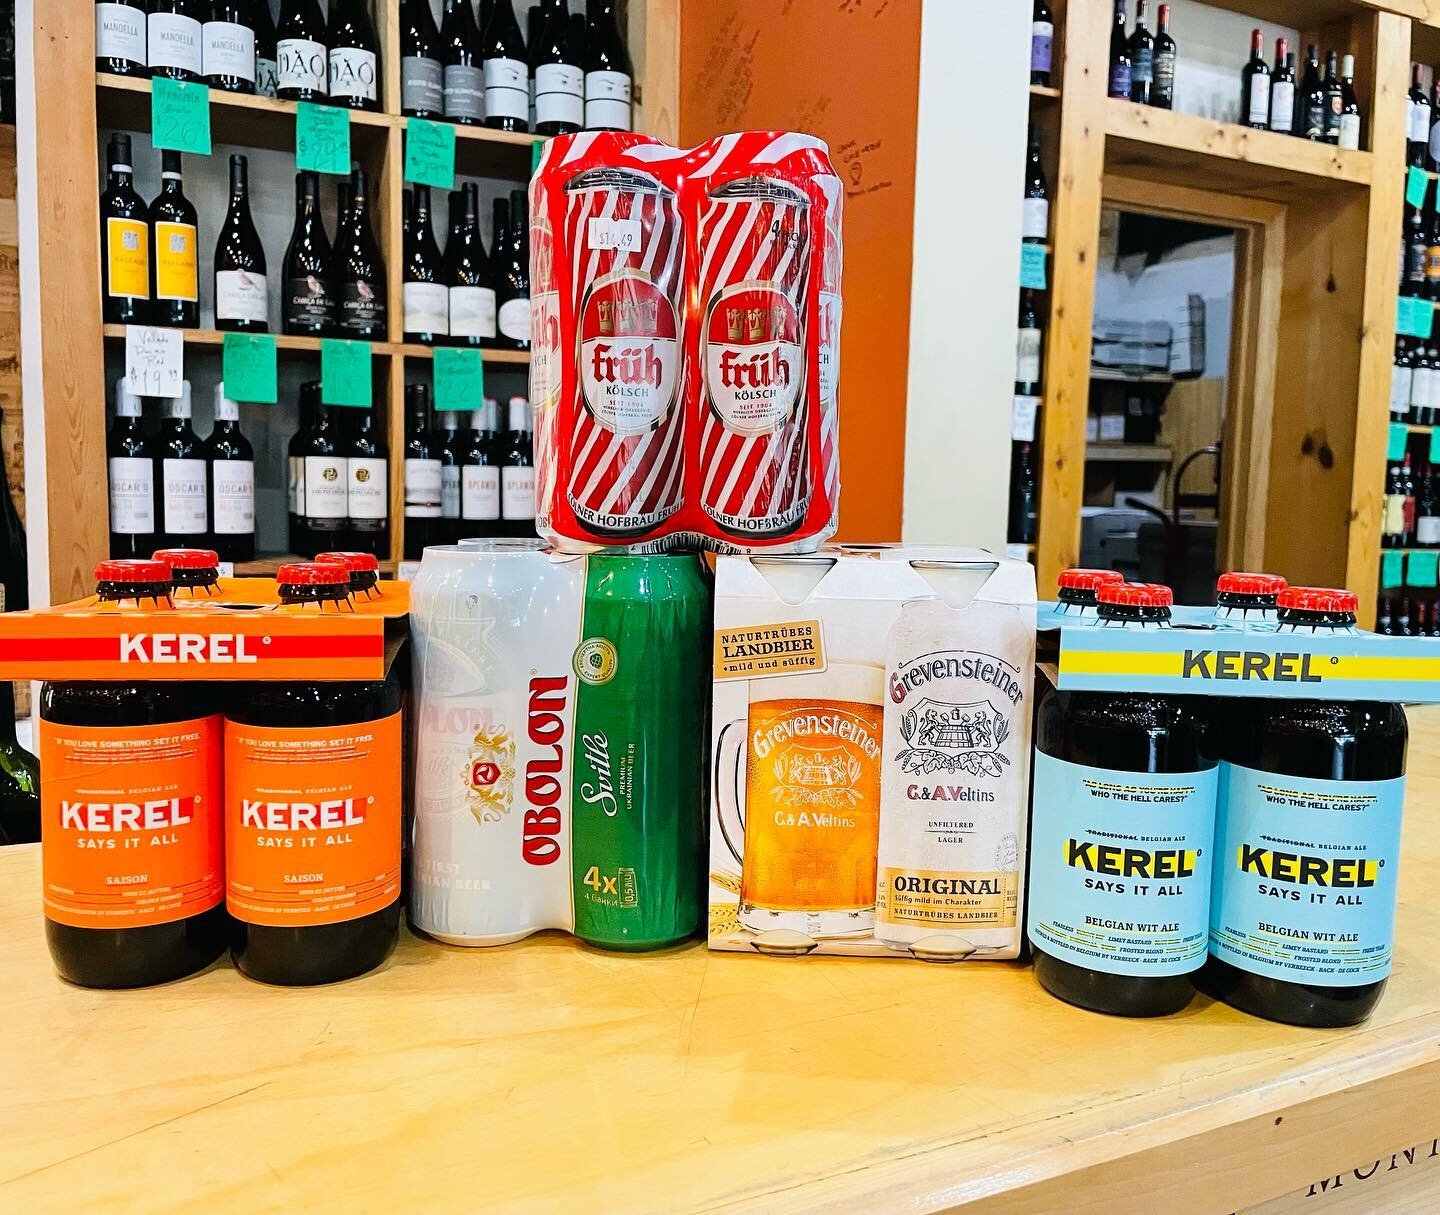 Friday Tasting Line Up! 

If you&rsquo;re a beer fan you won&rsquo;t want to miss these amazing European beers. Friday May 12th 5-7:30 pm!

We will also have some wines open for the wine peeps!